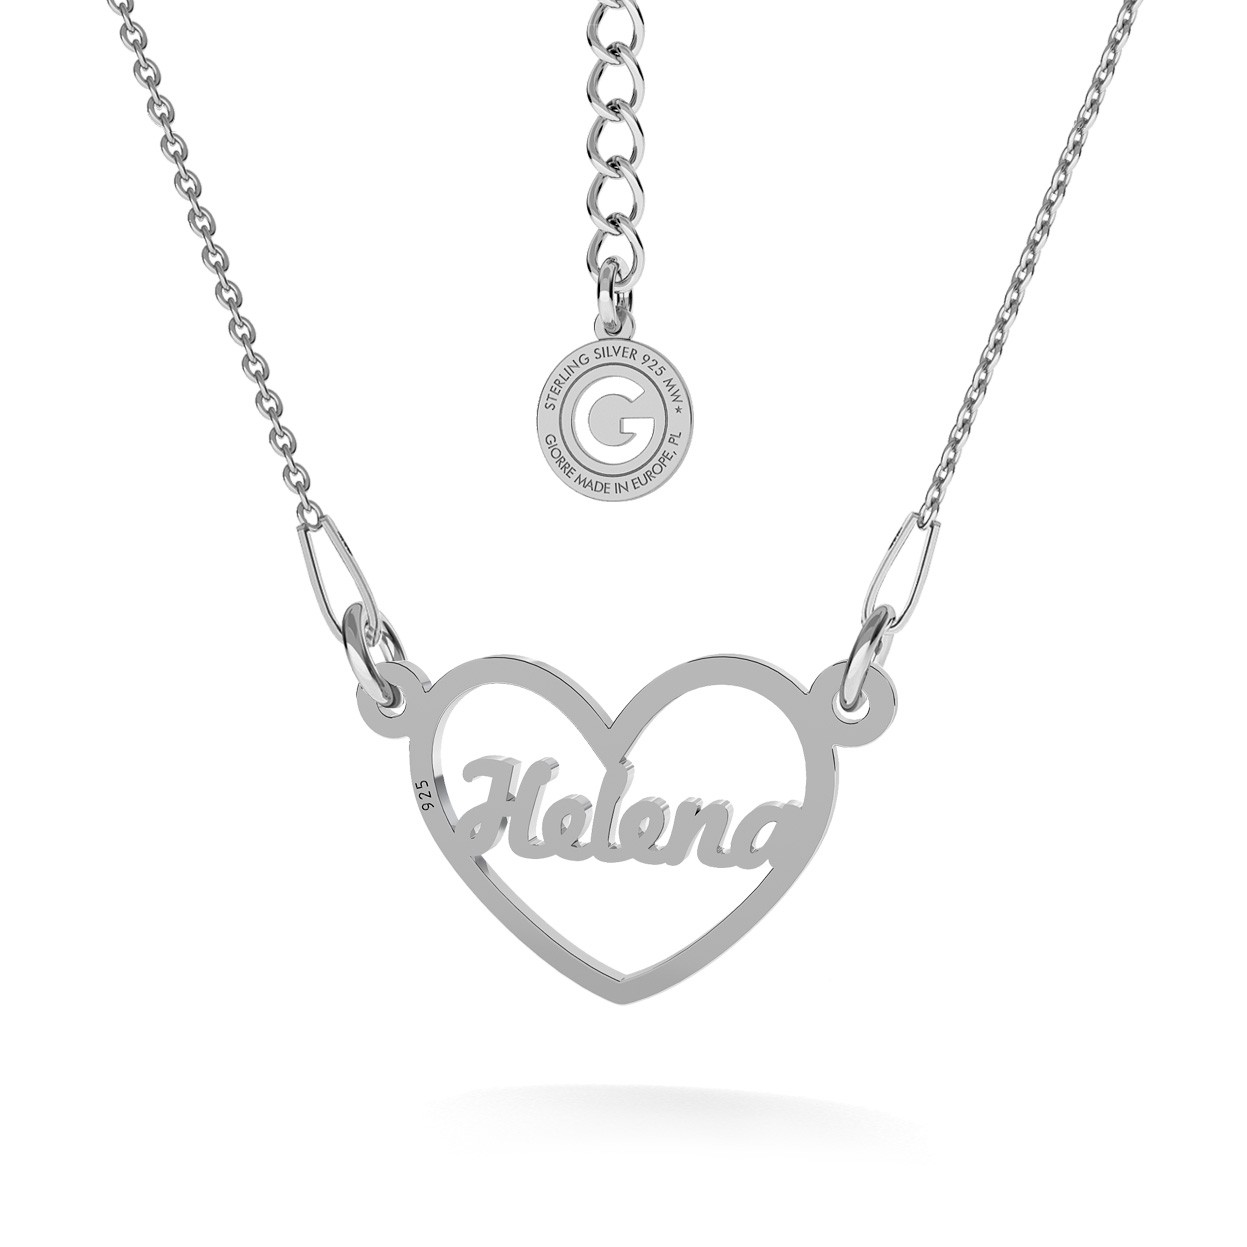 PERSONALIZED TRIPLE HEARTS NECKLACE